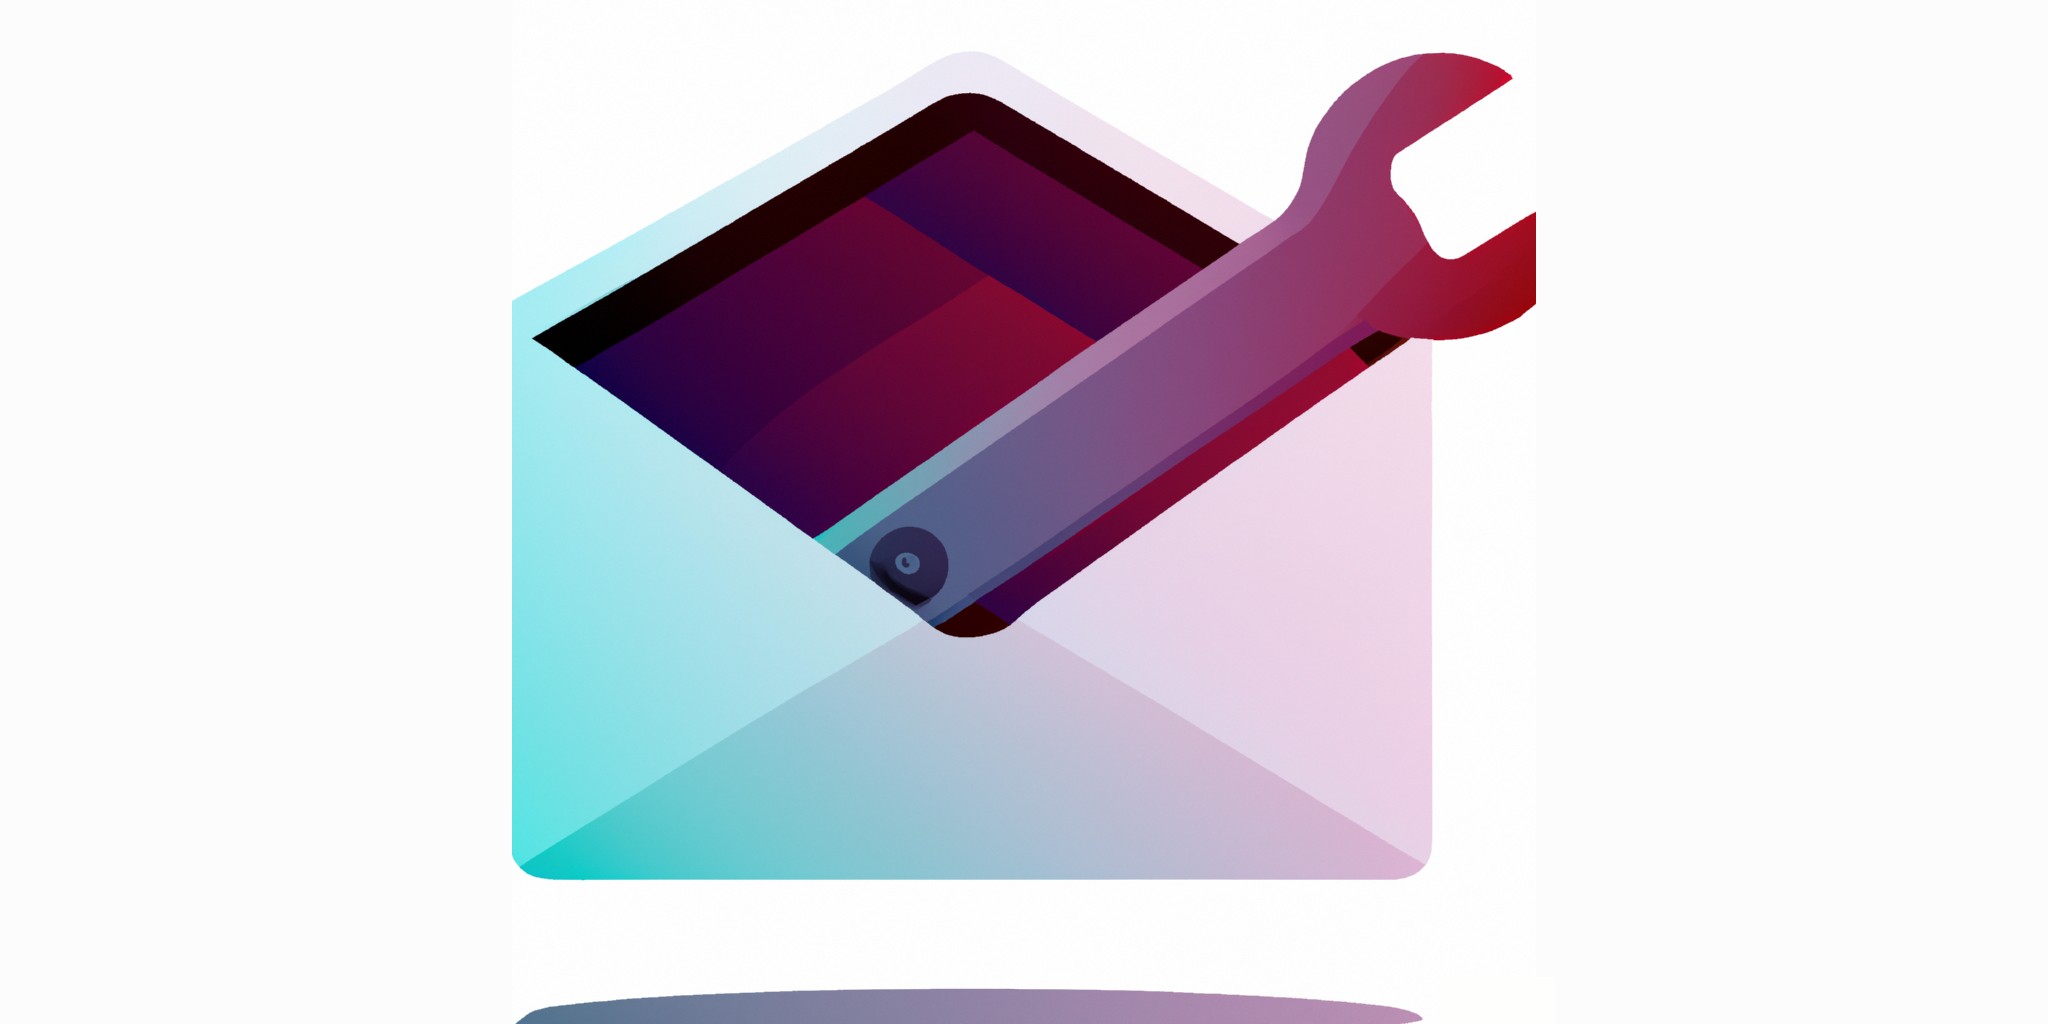 envelope transoforming into a wrench in flat illustration style with gradients and white background